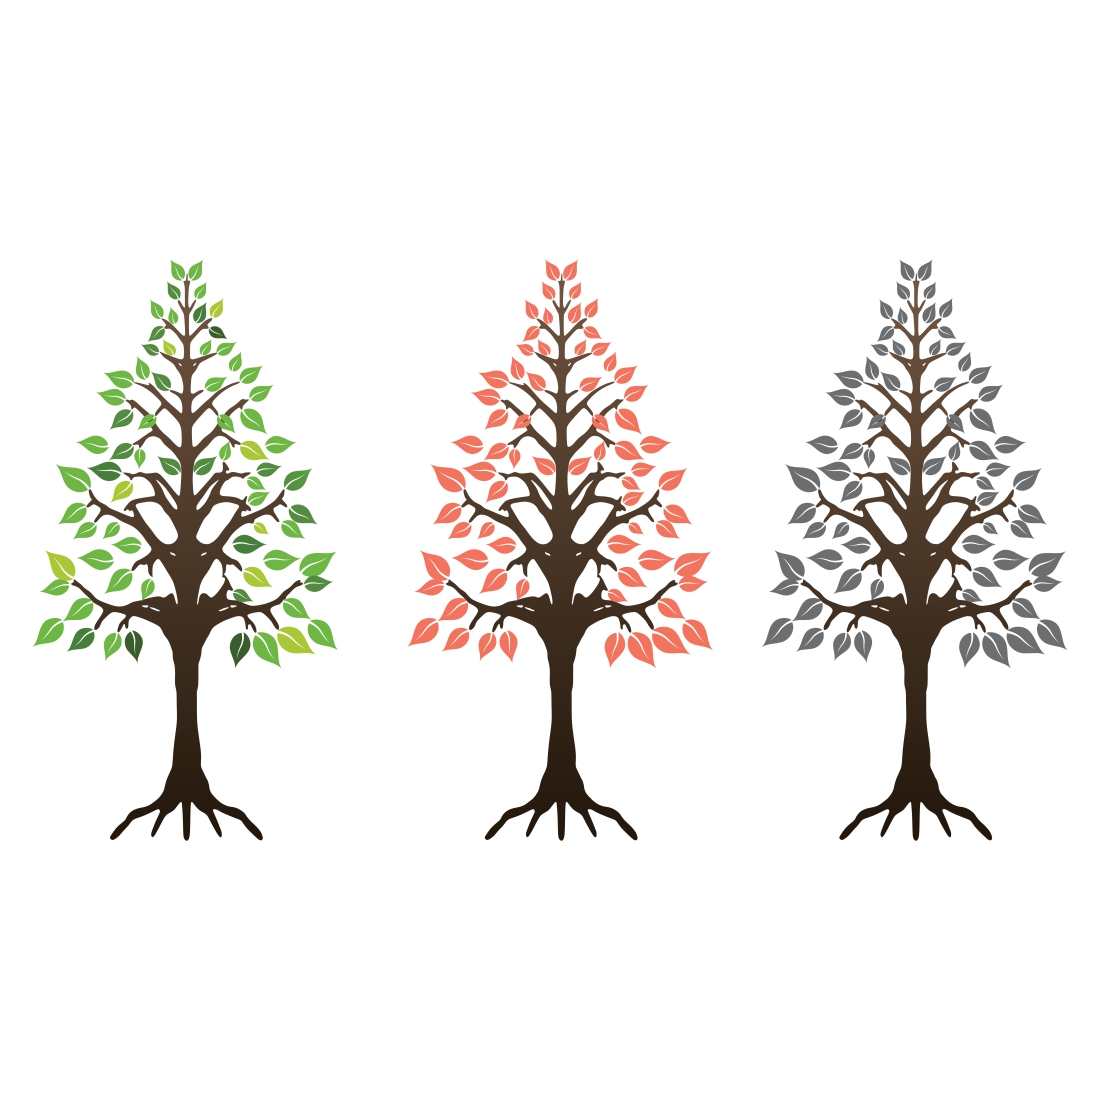 Free Tree Vector Illustration cover image.